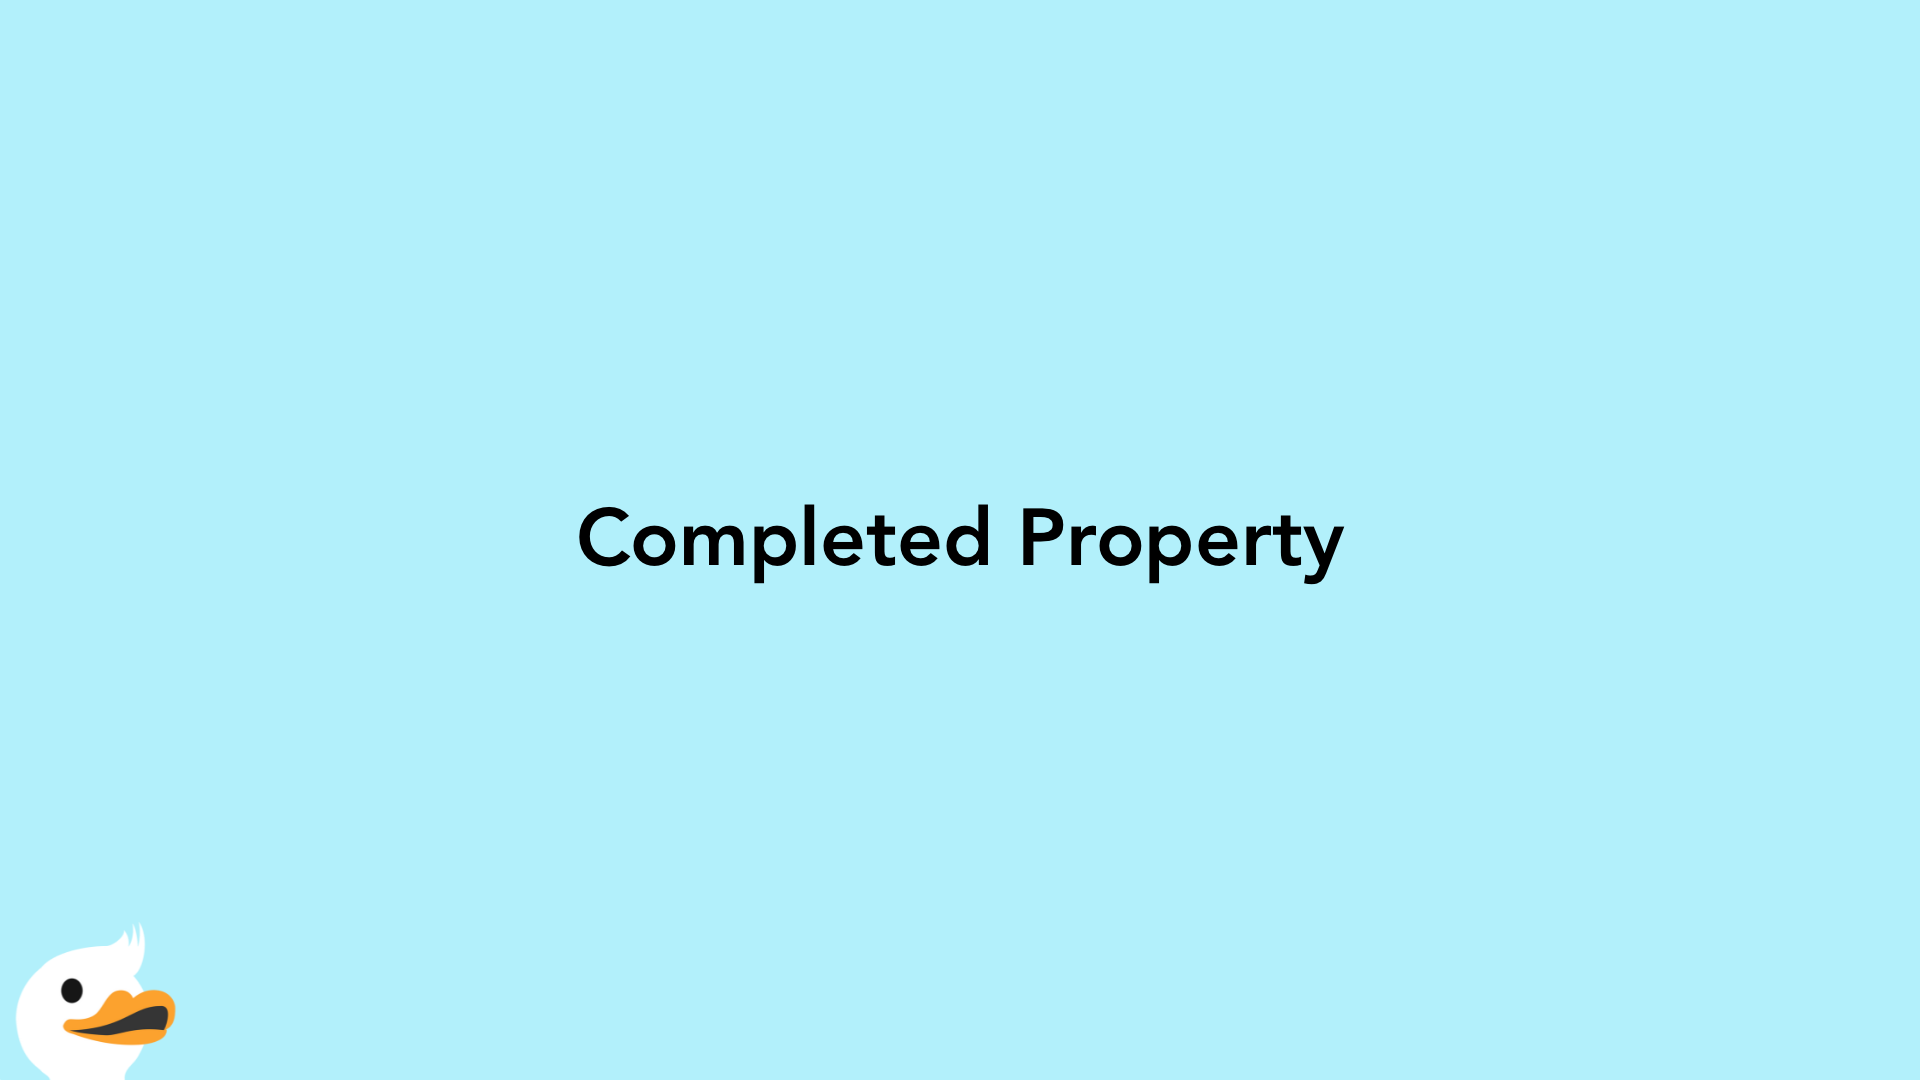 Completed Property